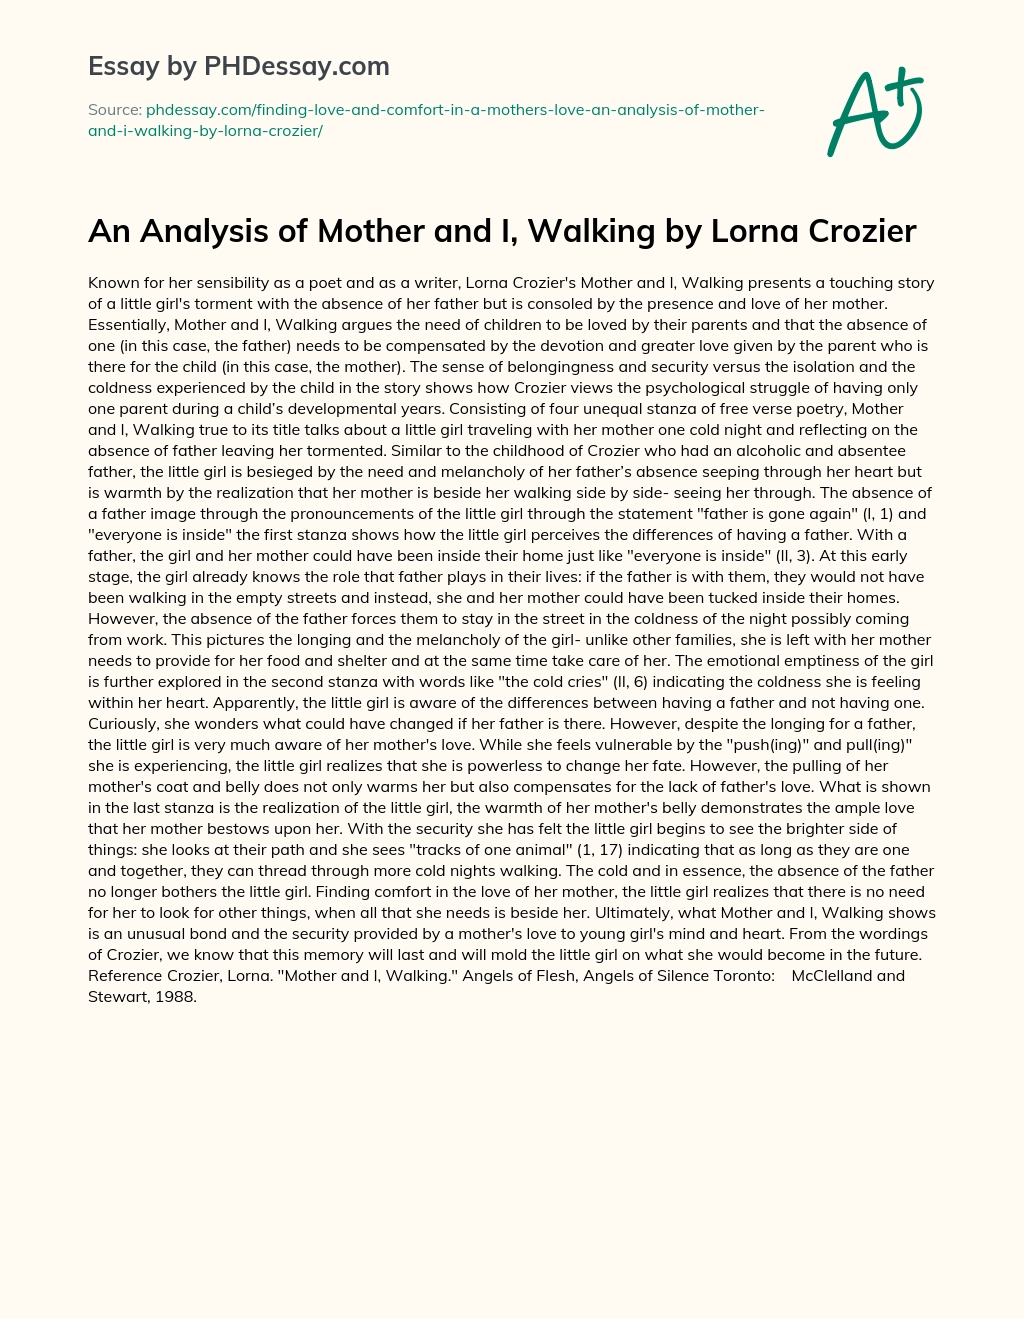 An Analysis of Mother and I, Walking by Lorna Crozier essay